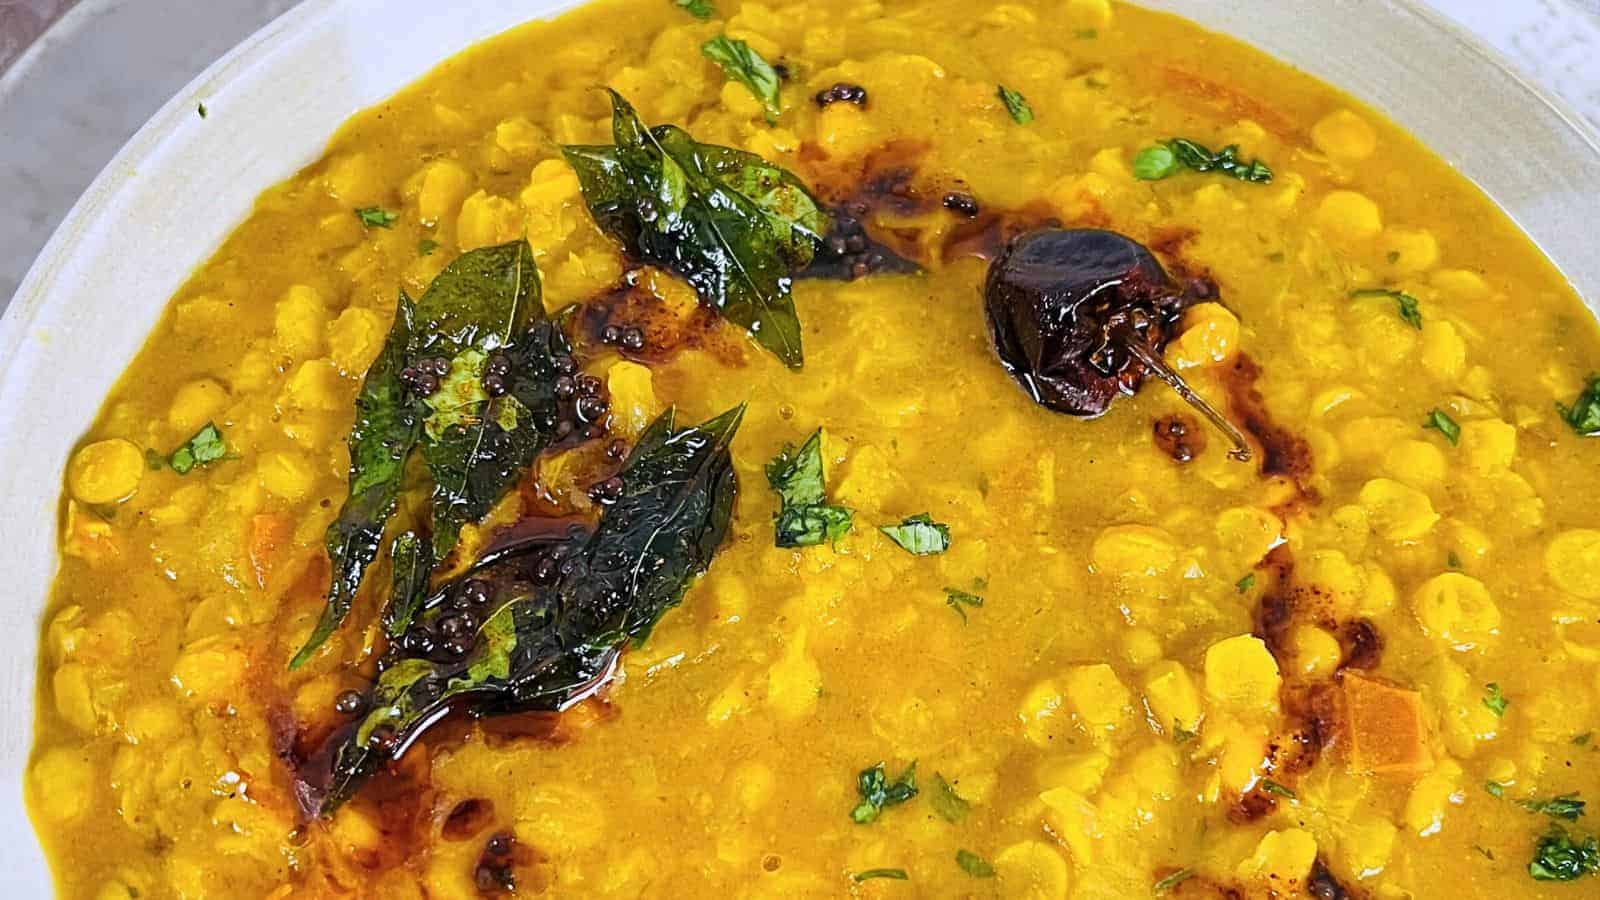 Chana Dal with yellow lentils, garnished with fresh cilantro and tempered spices, including curry leaves and dried chilies.